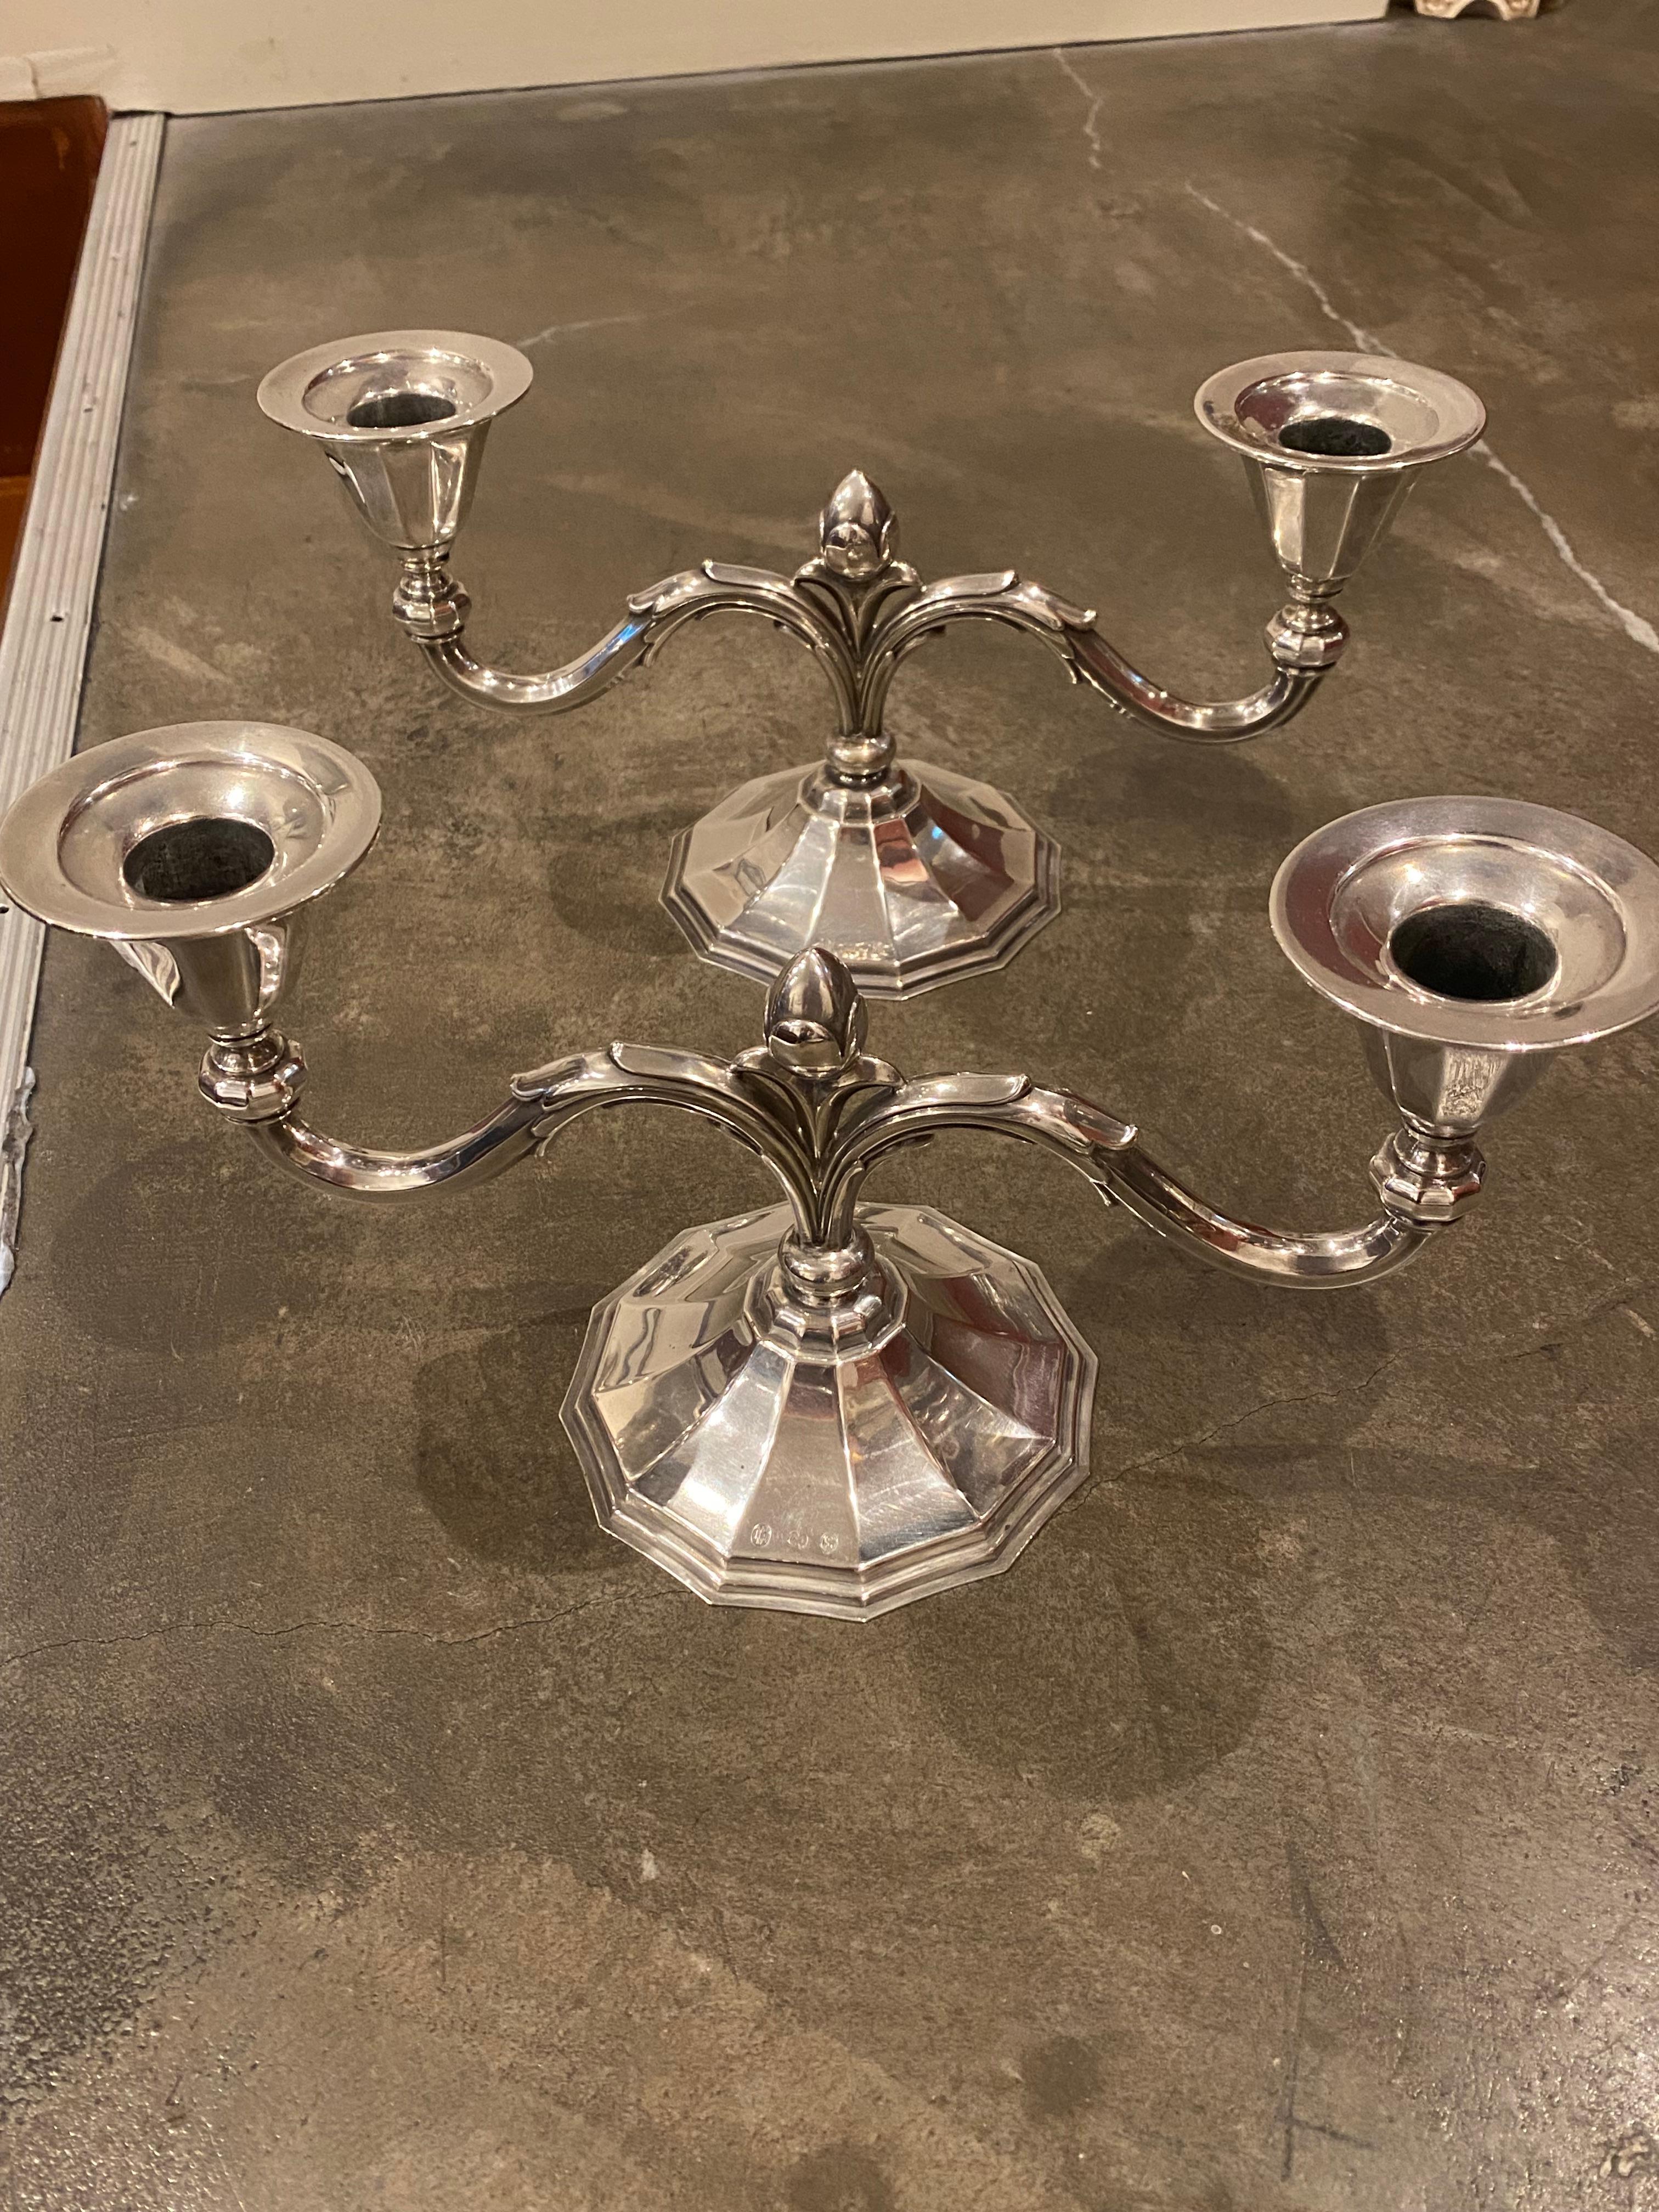 Finds such as these Silver Candlesticks / Candelabras
by Danish silversmith Carl M Cohr, 
assay master - Johannes Siggaard
are rare (especially in such fine condition)
 
Of Georg Jensen style, 
each candlestick has 2 finely detailed arms, 
raised on